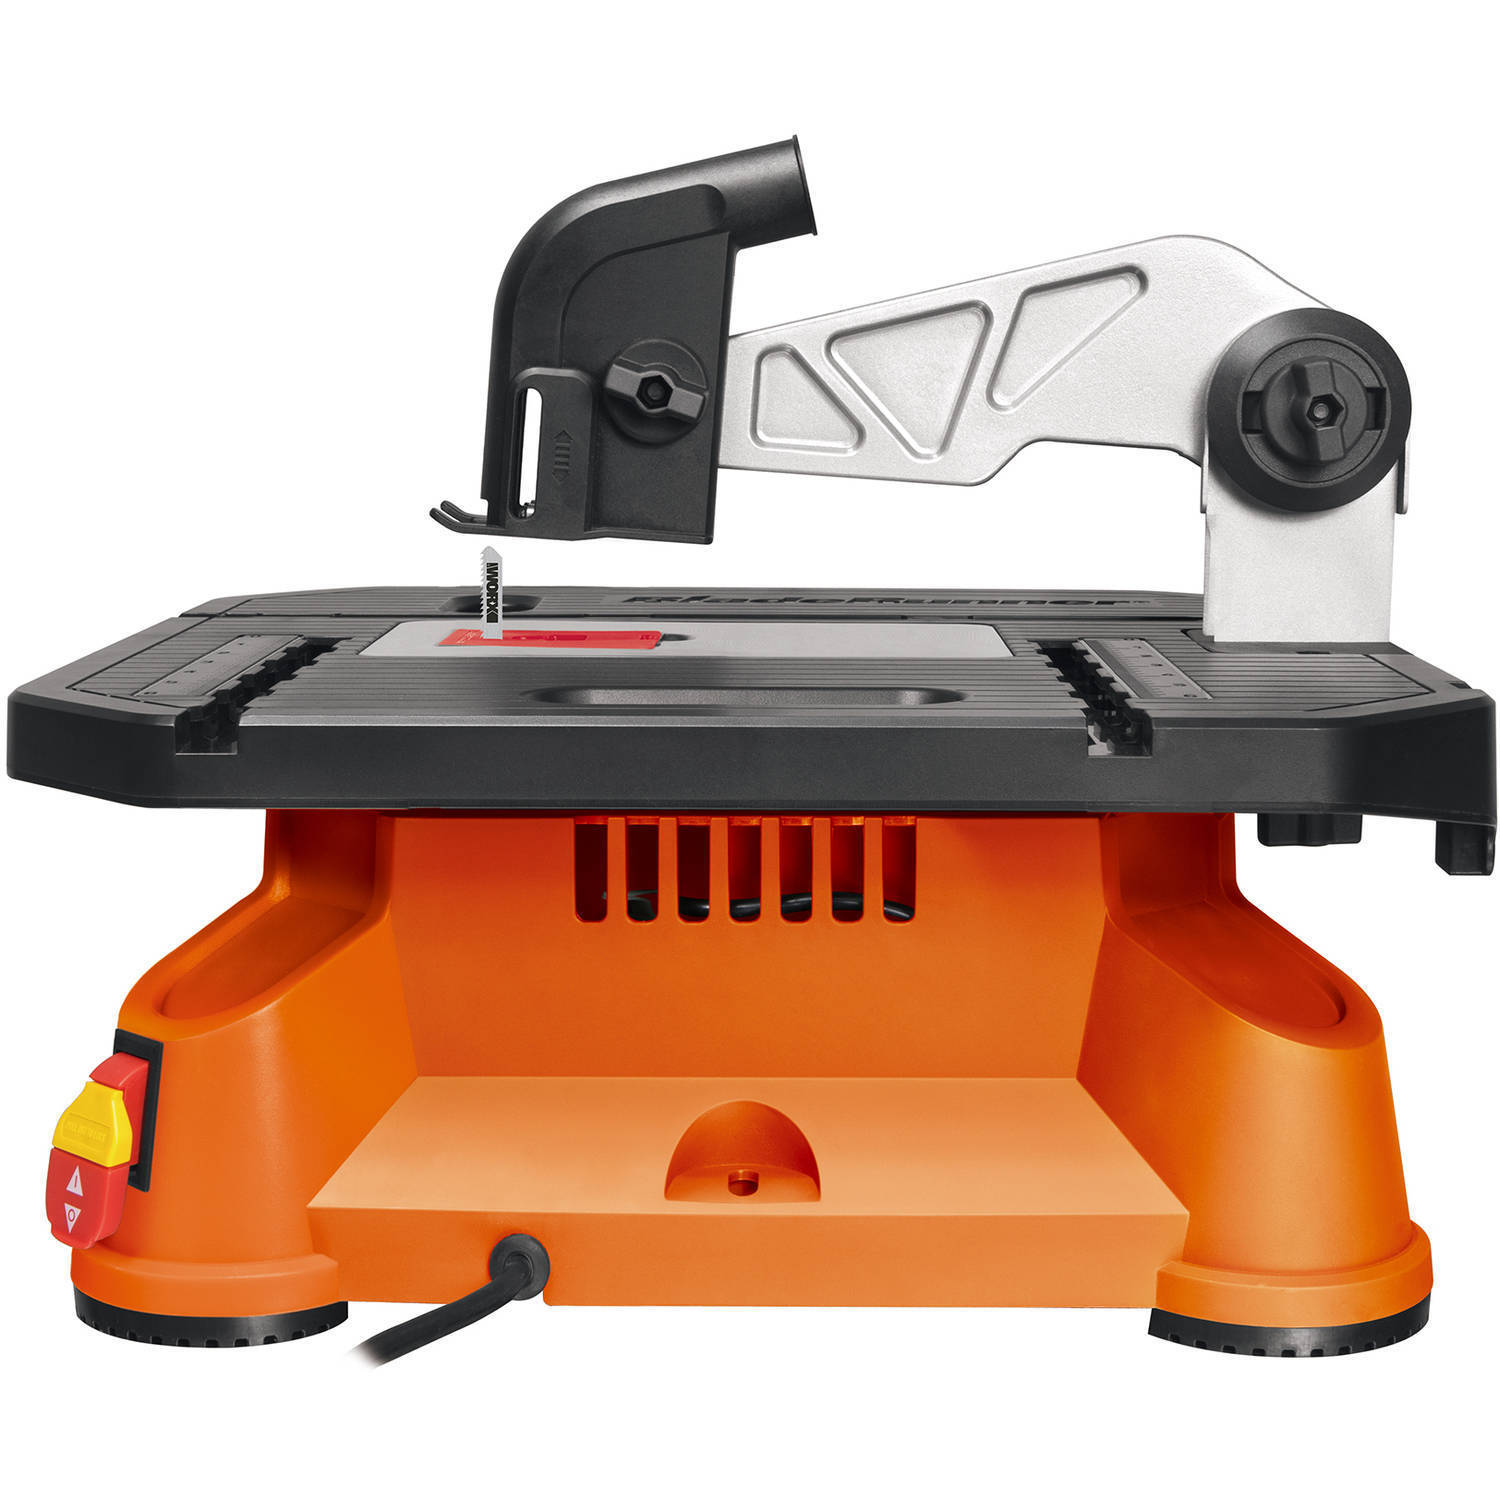 WORX BladeRunner x2 Portable Tabletop Saw # WX572L - image 2 of 7